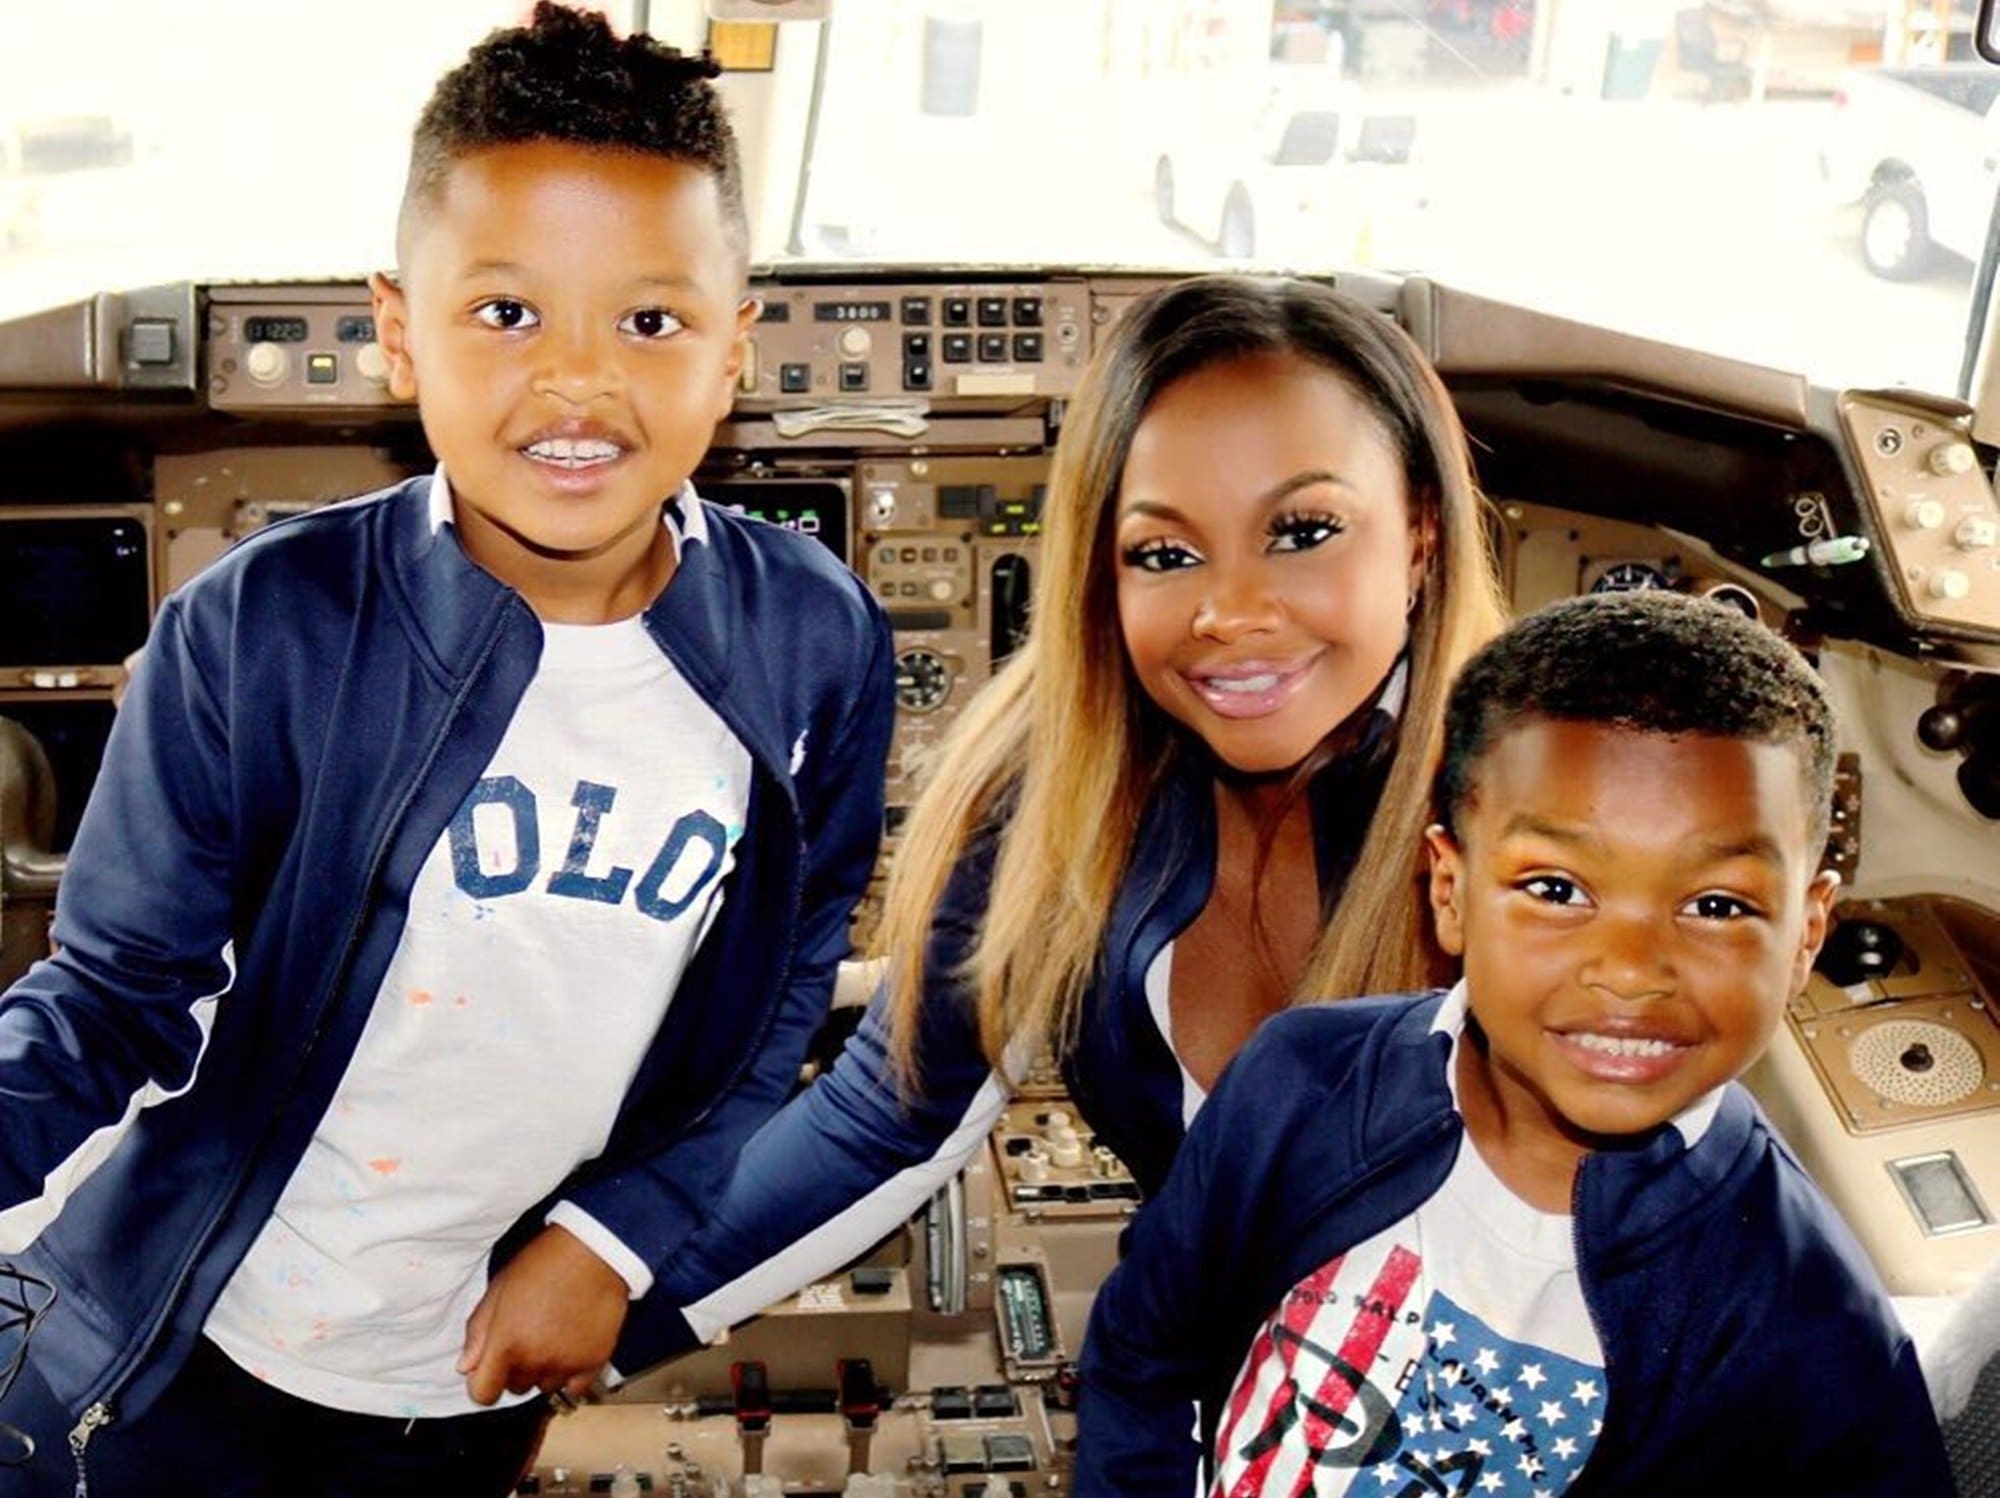 Phaedra Parks Drowns Her Fans In Melancholy With A Gorgeous Throwback Easter Photo Featuring Her Boys, Dylan And Ayden